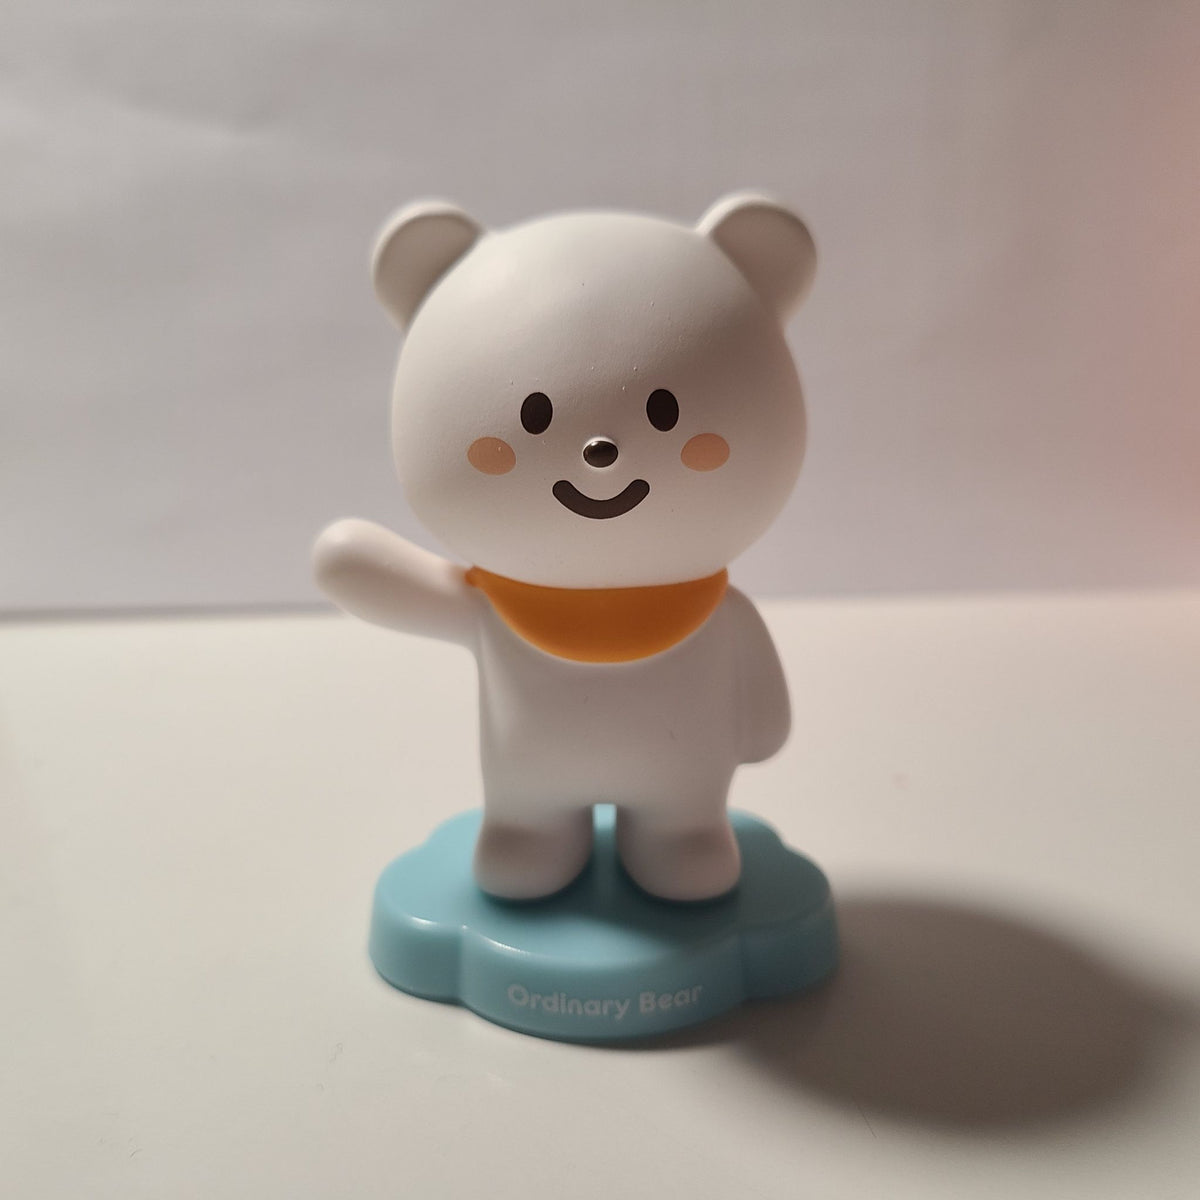 Ordinary Bear - Fluffy House Mr. White Cloud Series 1 by POP MART - 1